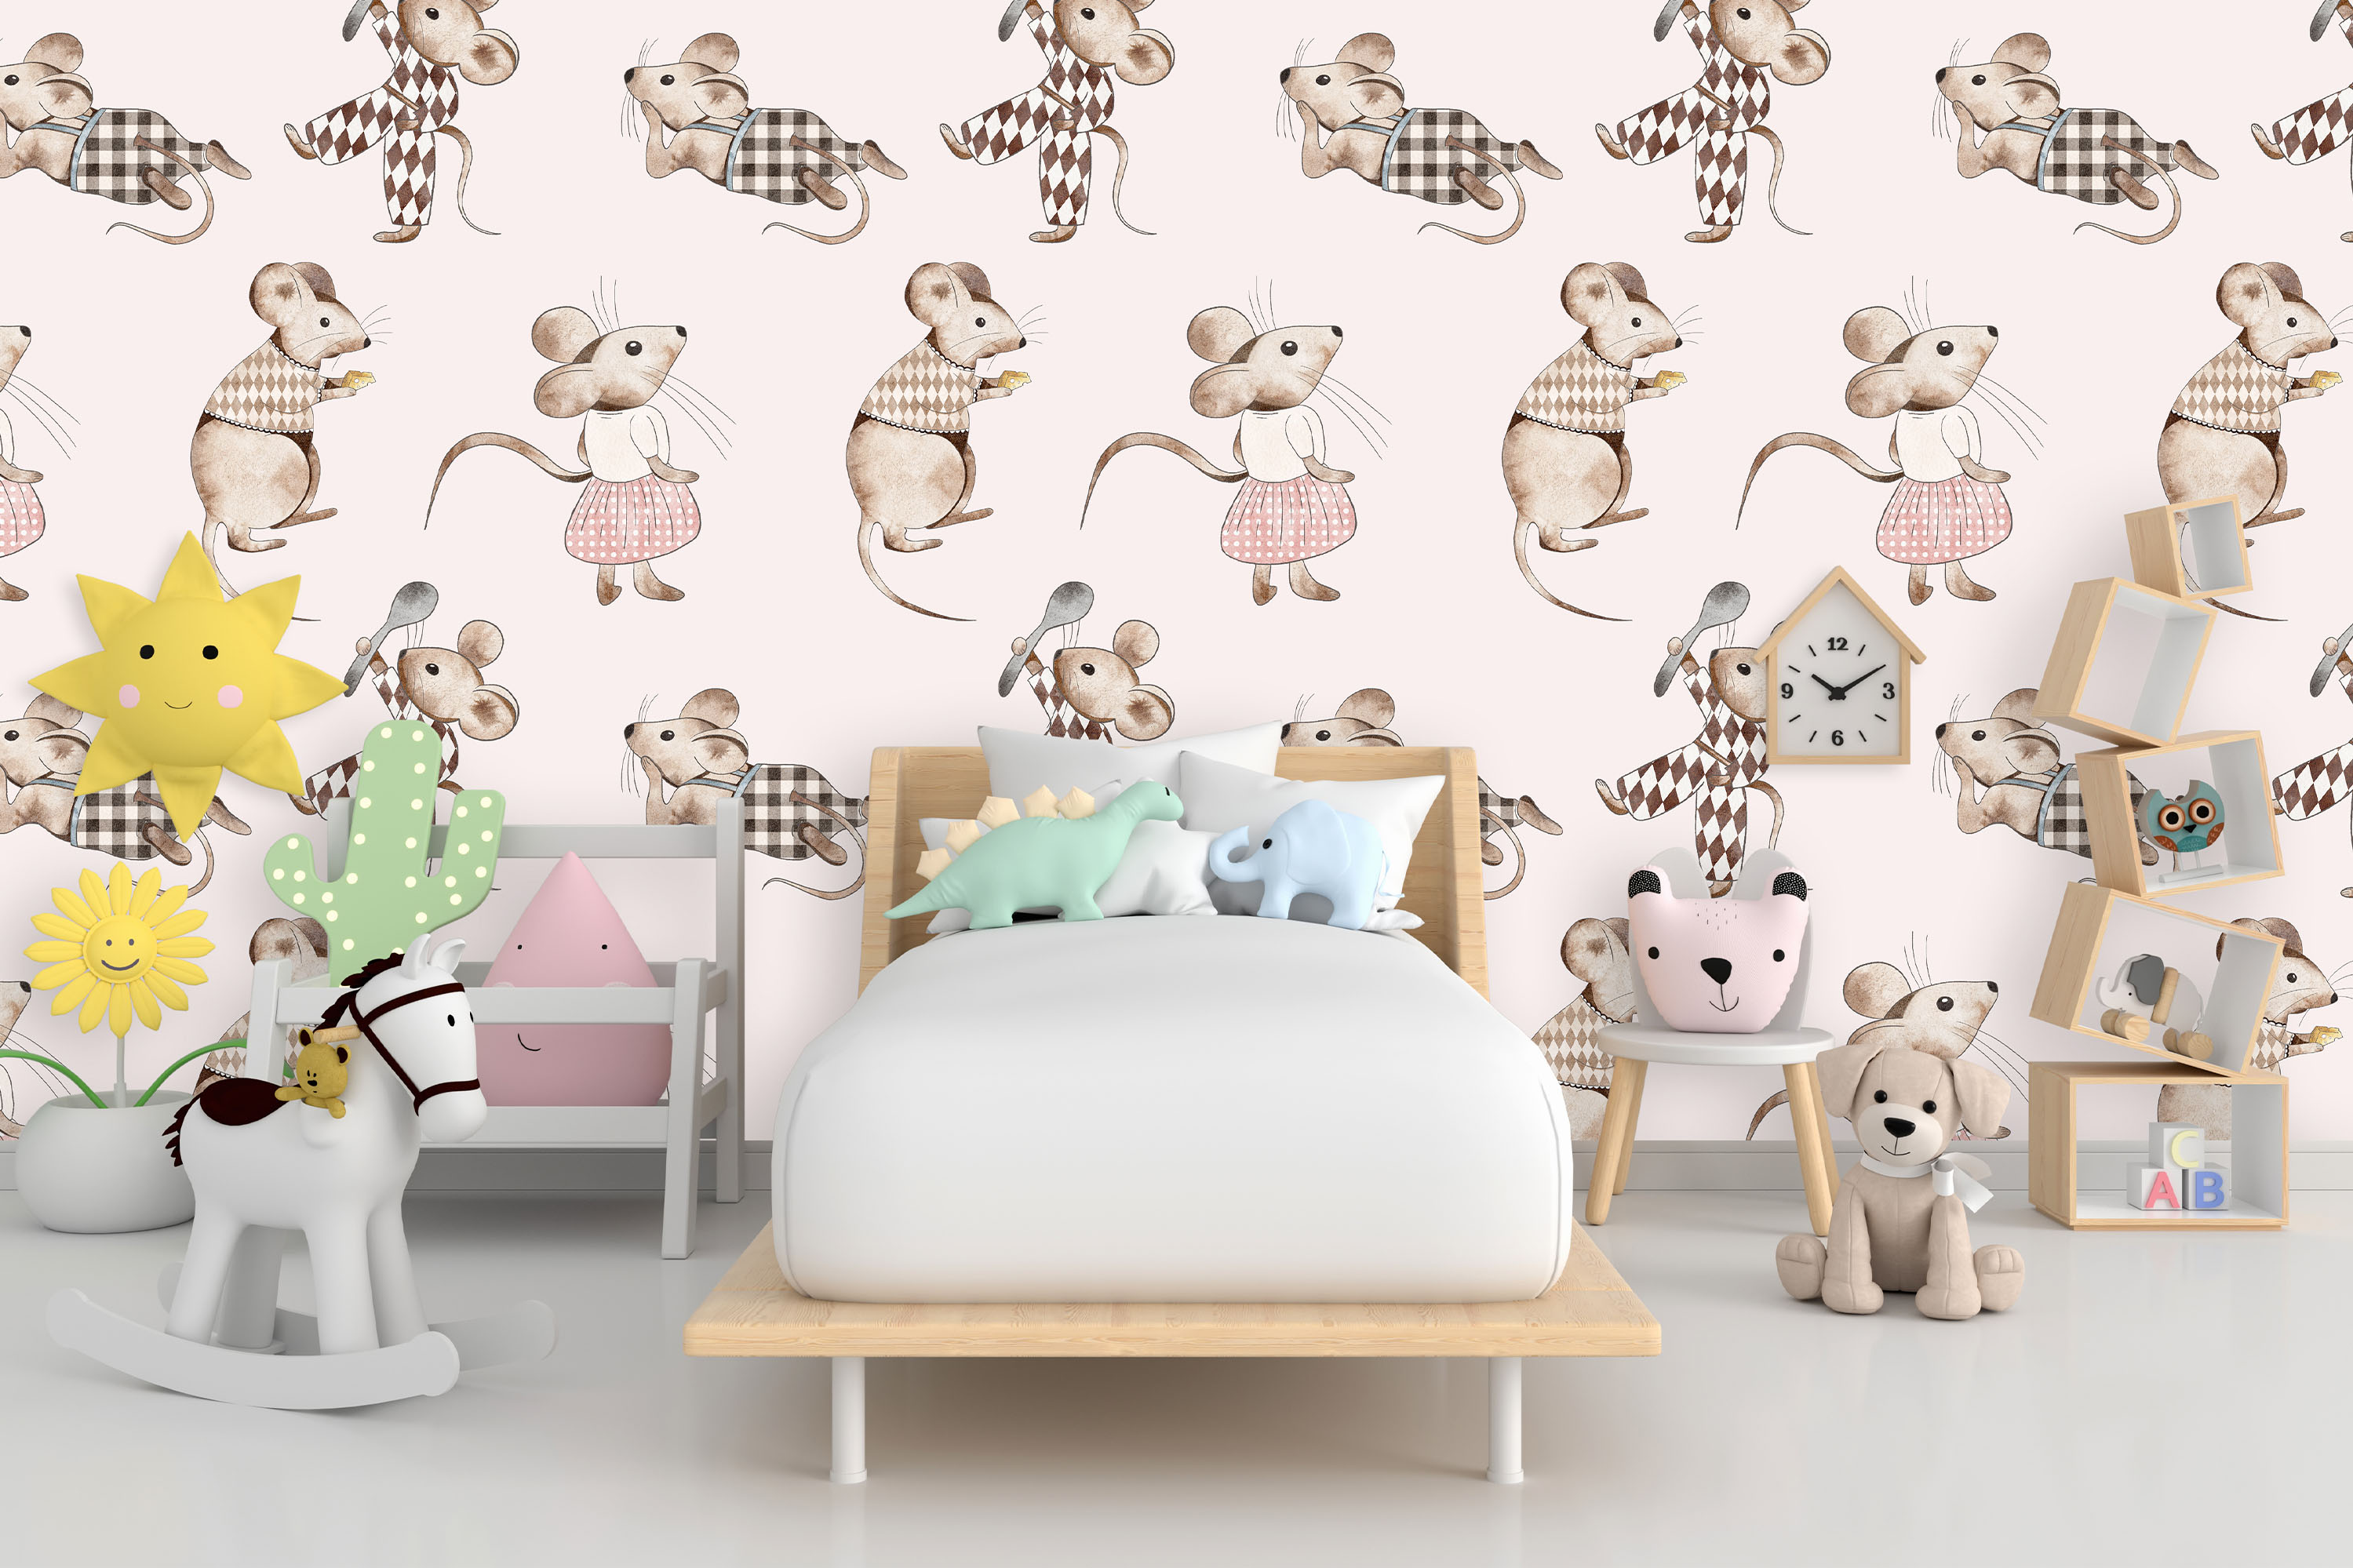 Watercolor Spring Cleaning Cute Mice Nursery Art Collection mockup.